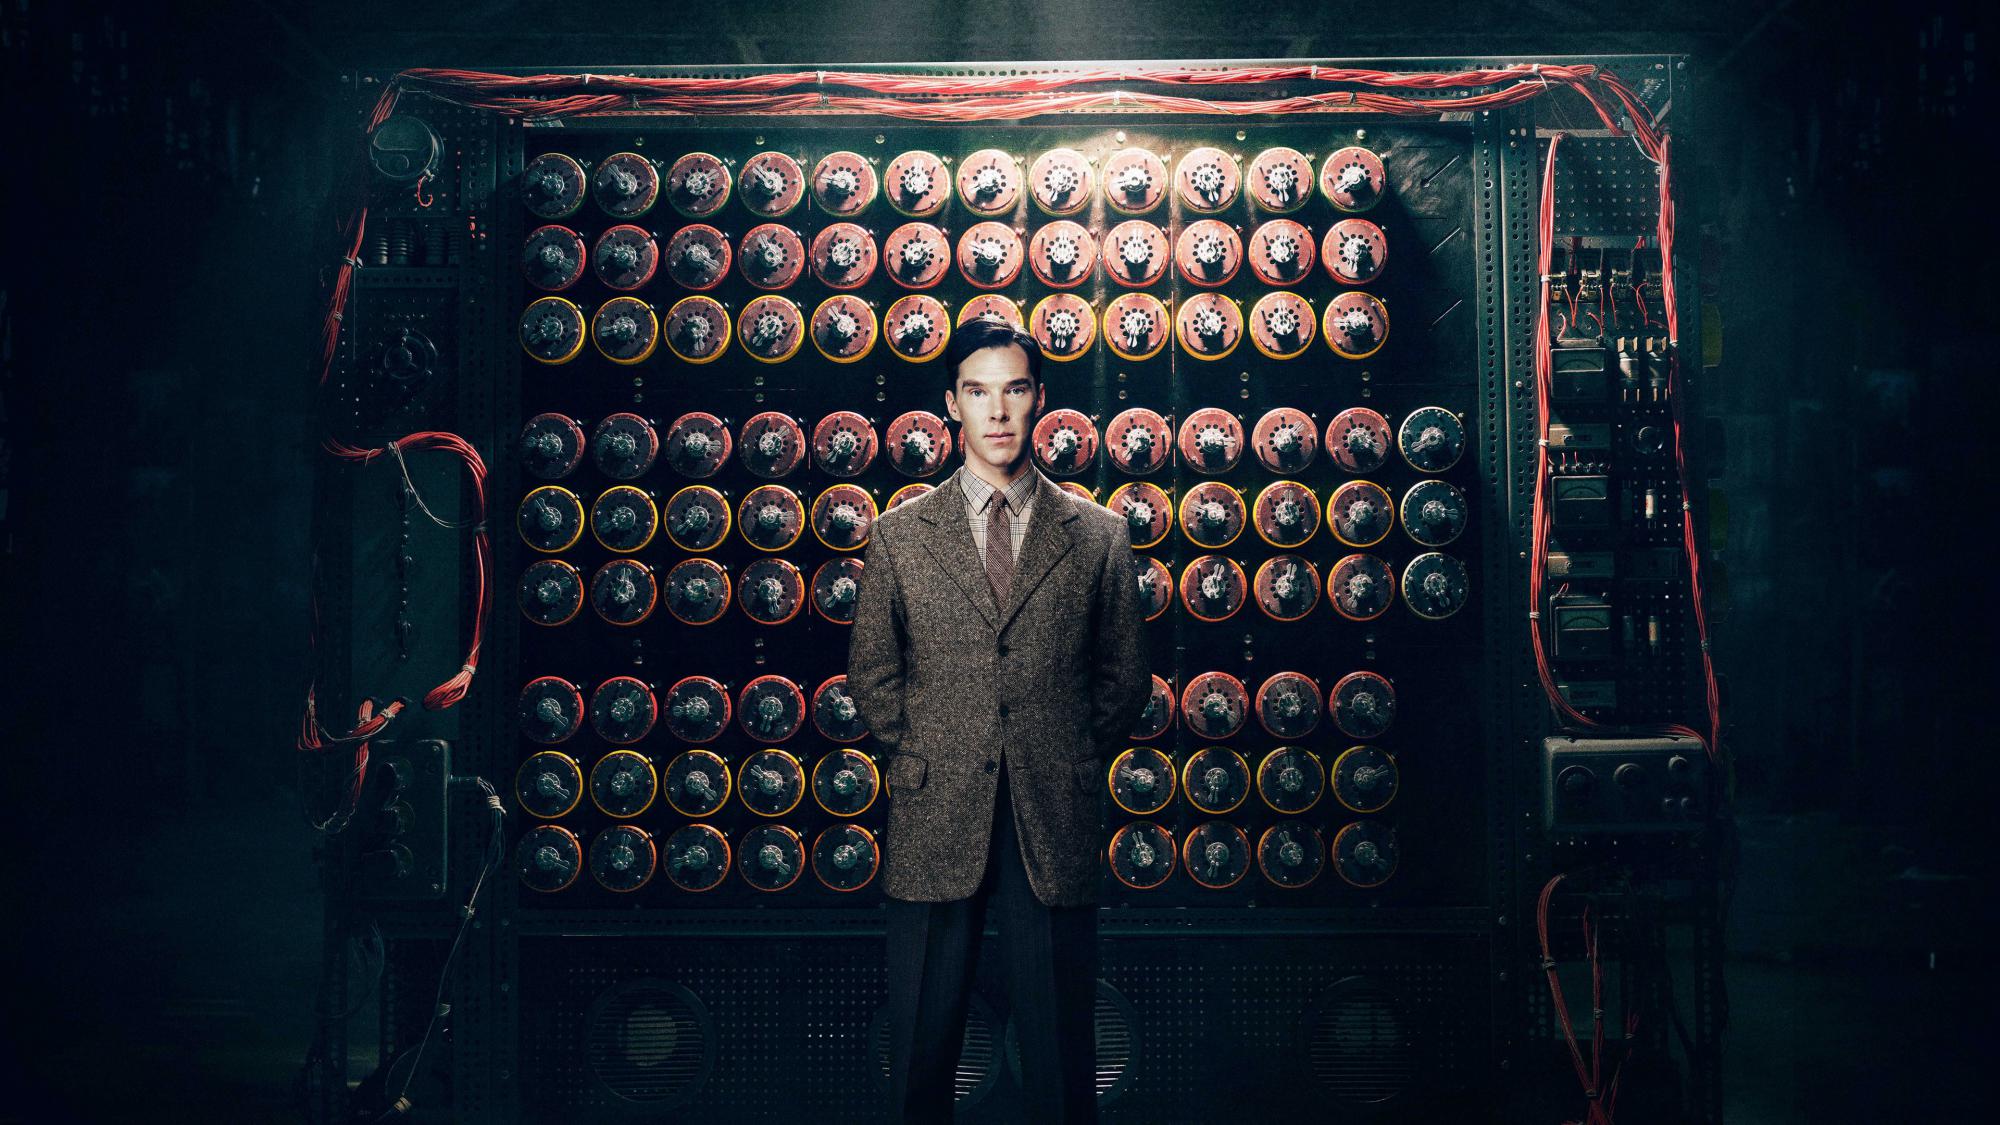 Backdrop Image for The Imitation Game